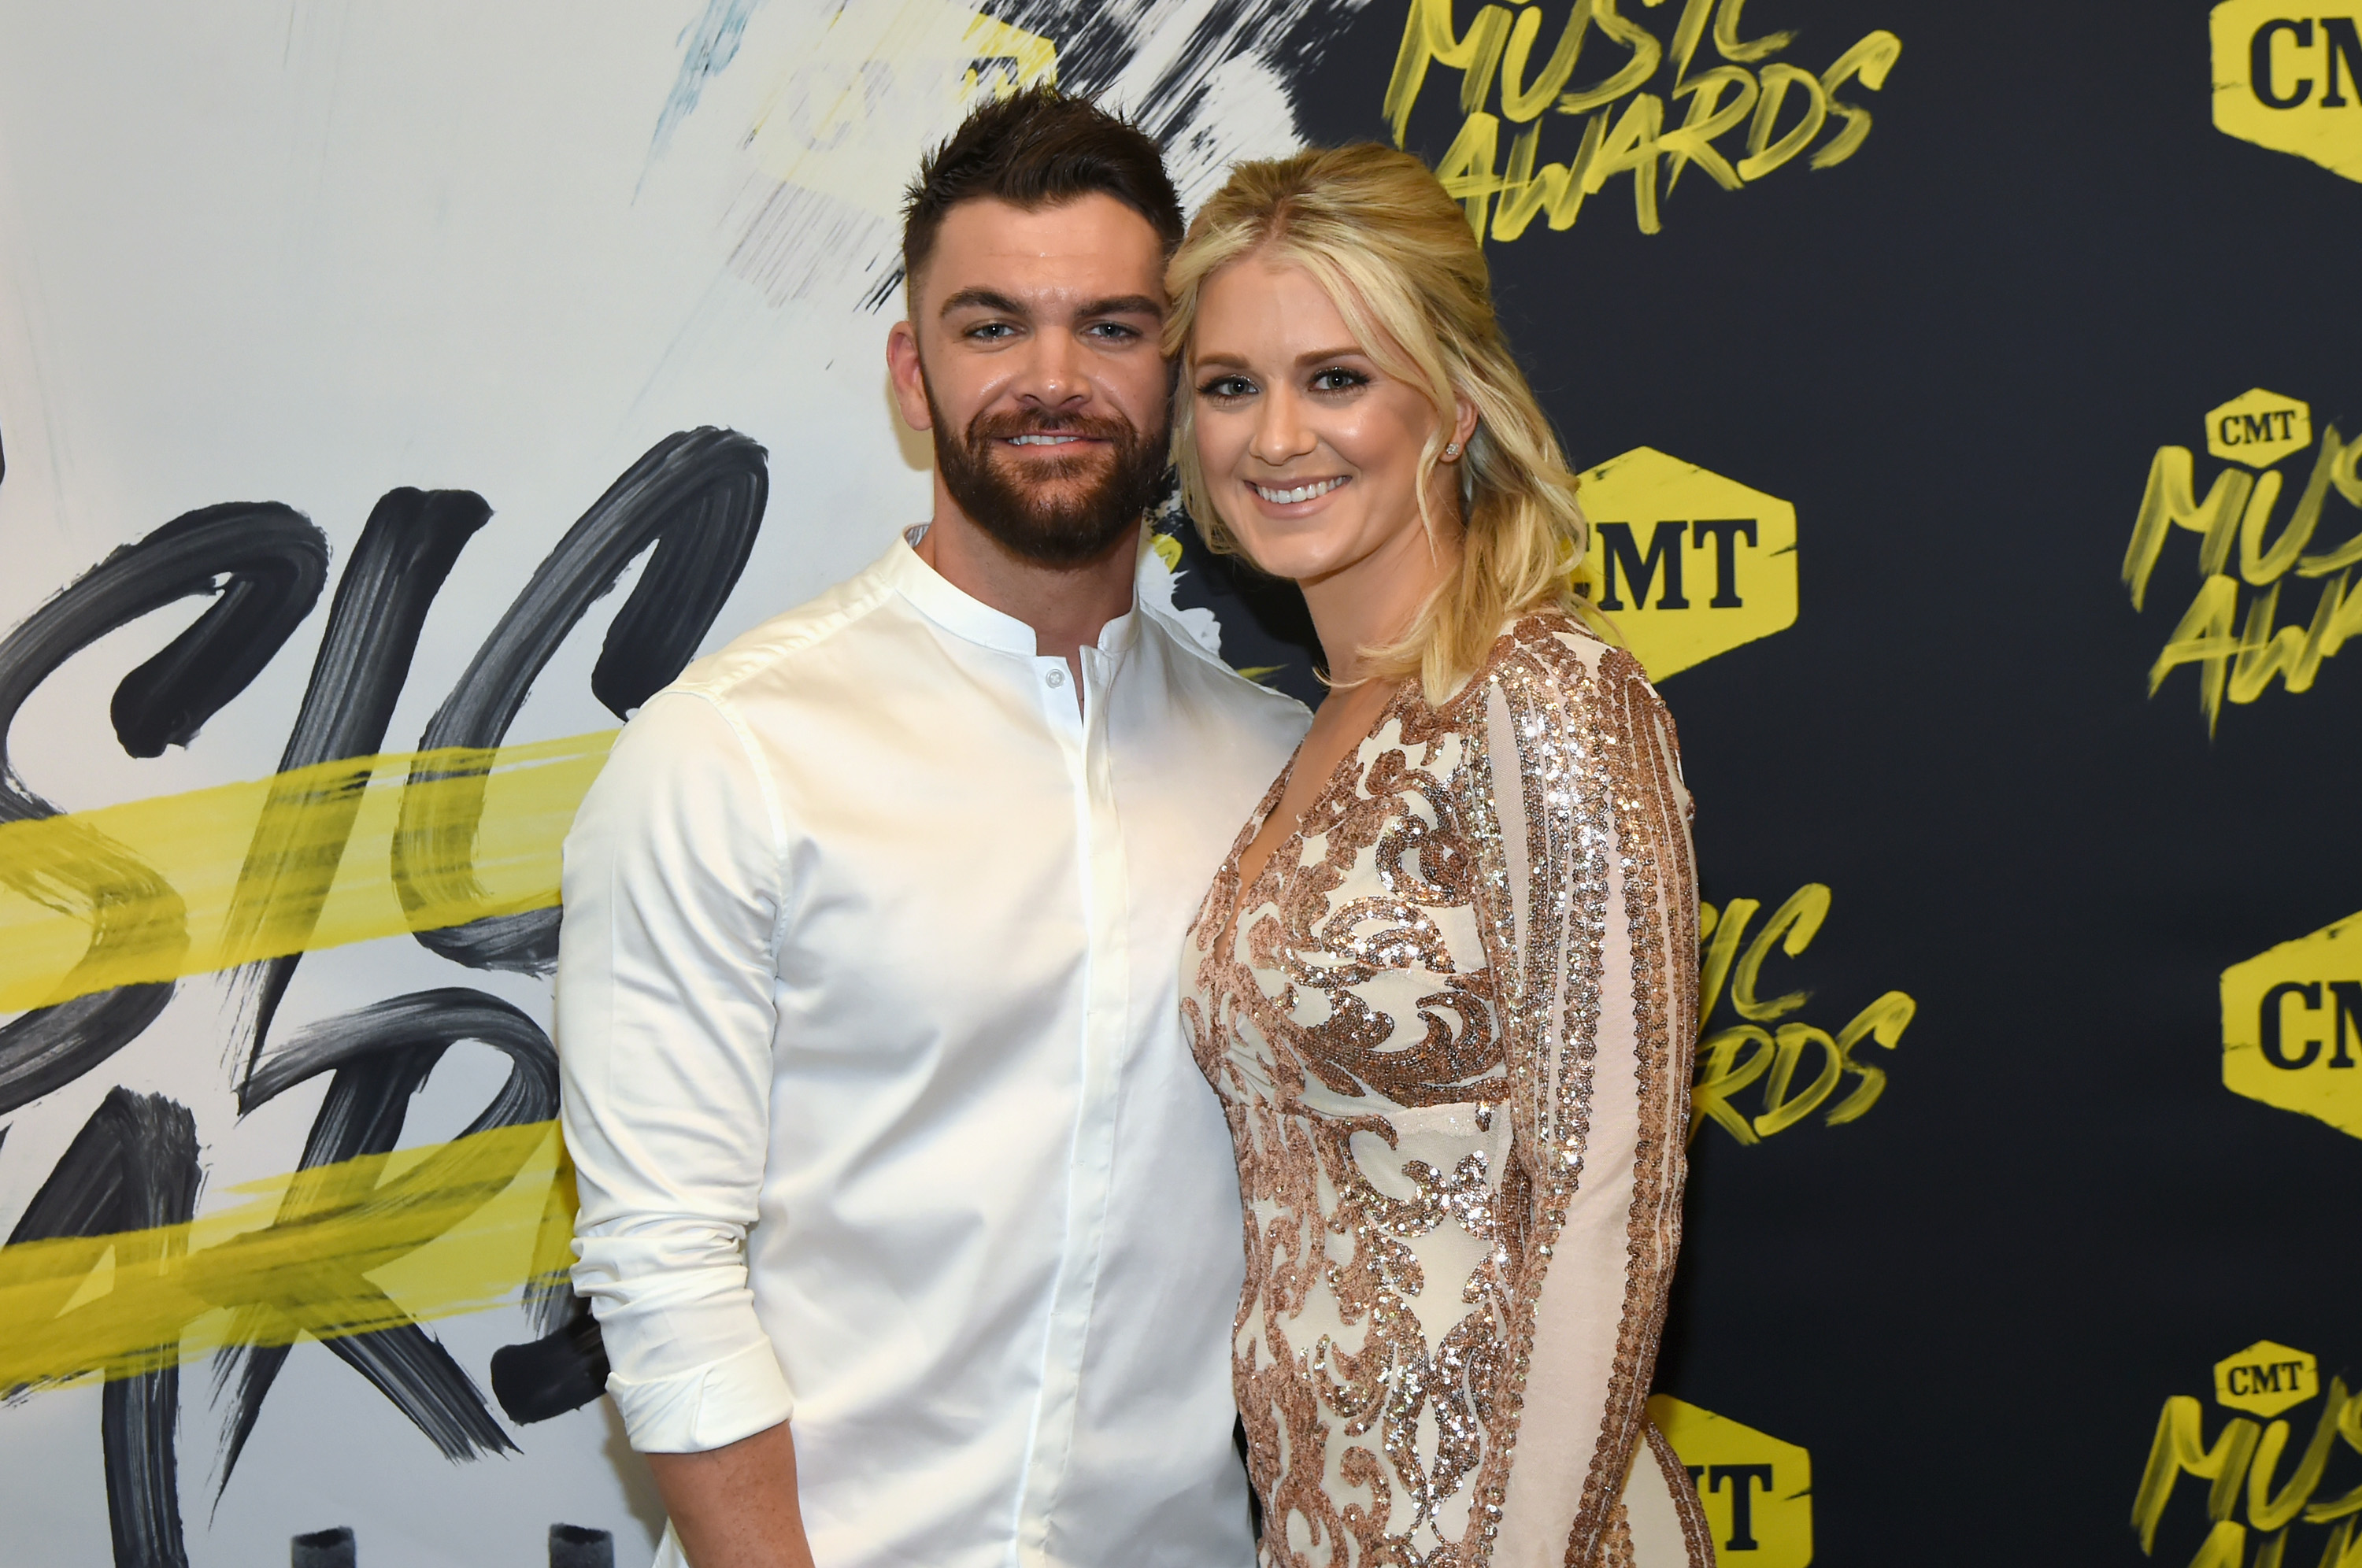 Dylan Scott and Blair Robinson at the 2018 CMT Music Awards in Nashville, Tennessee. | Source: Getty Images